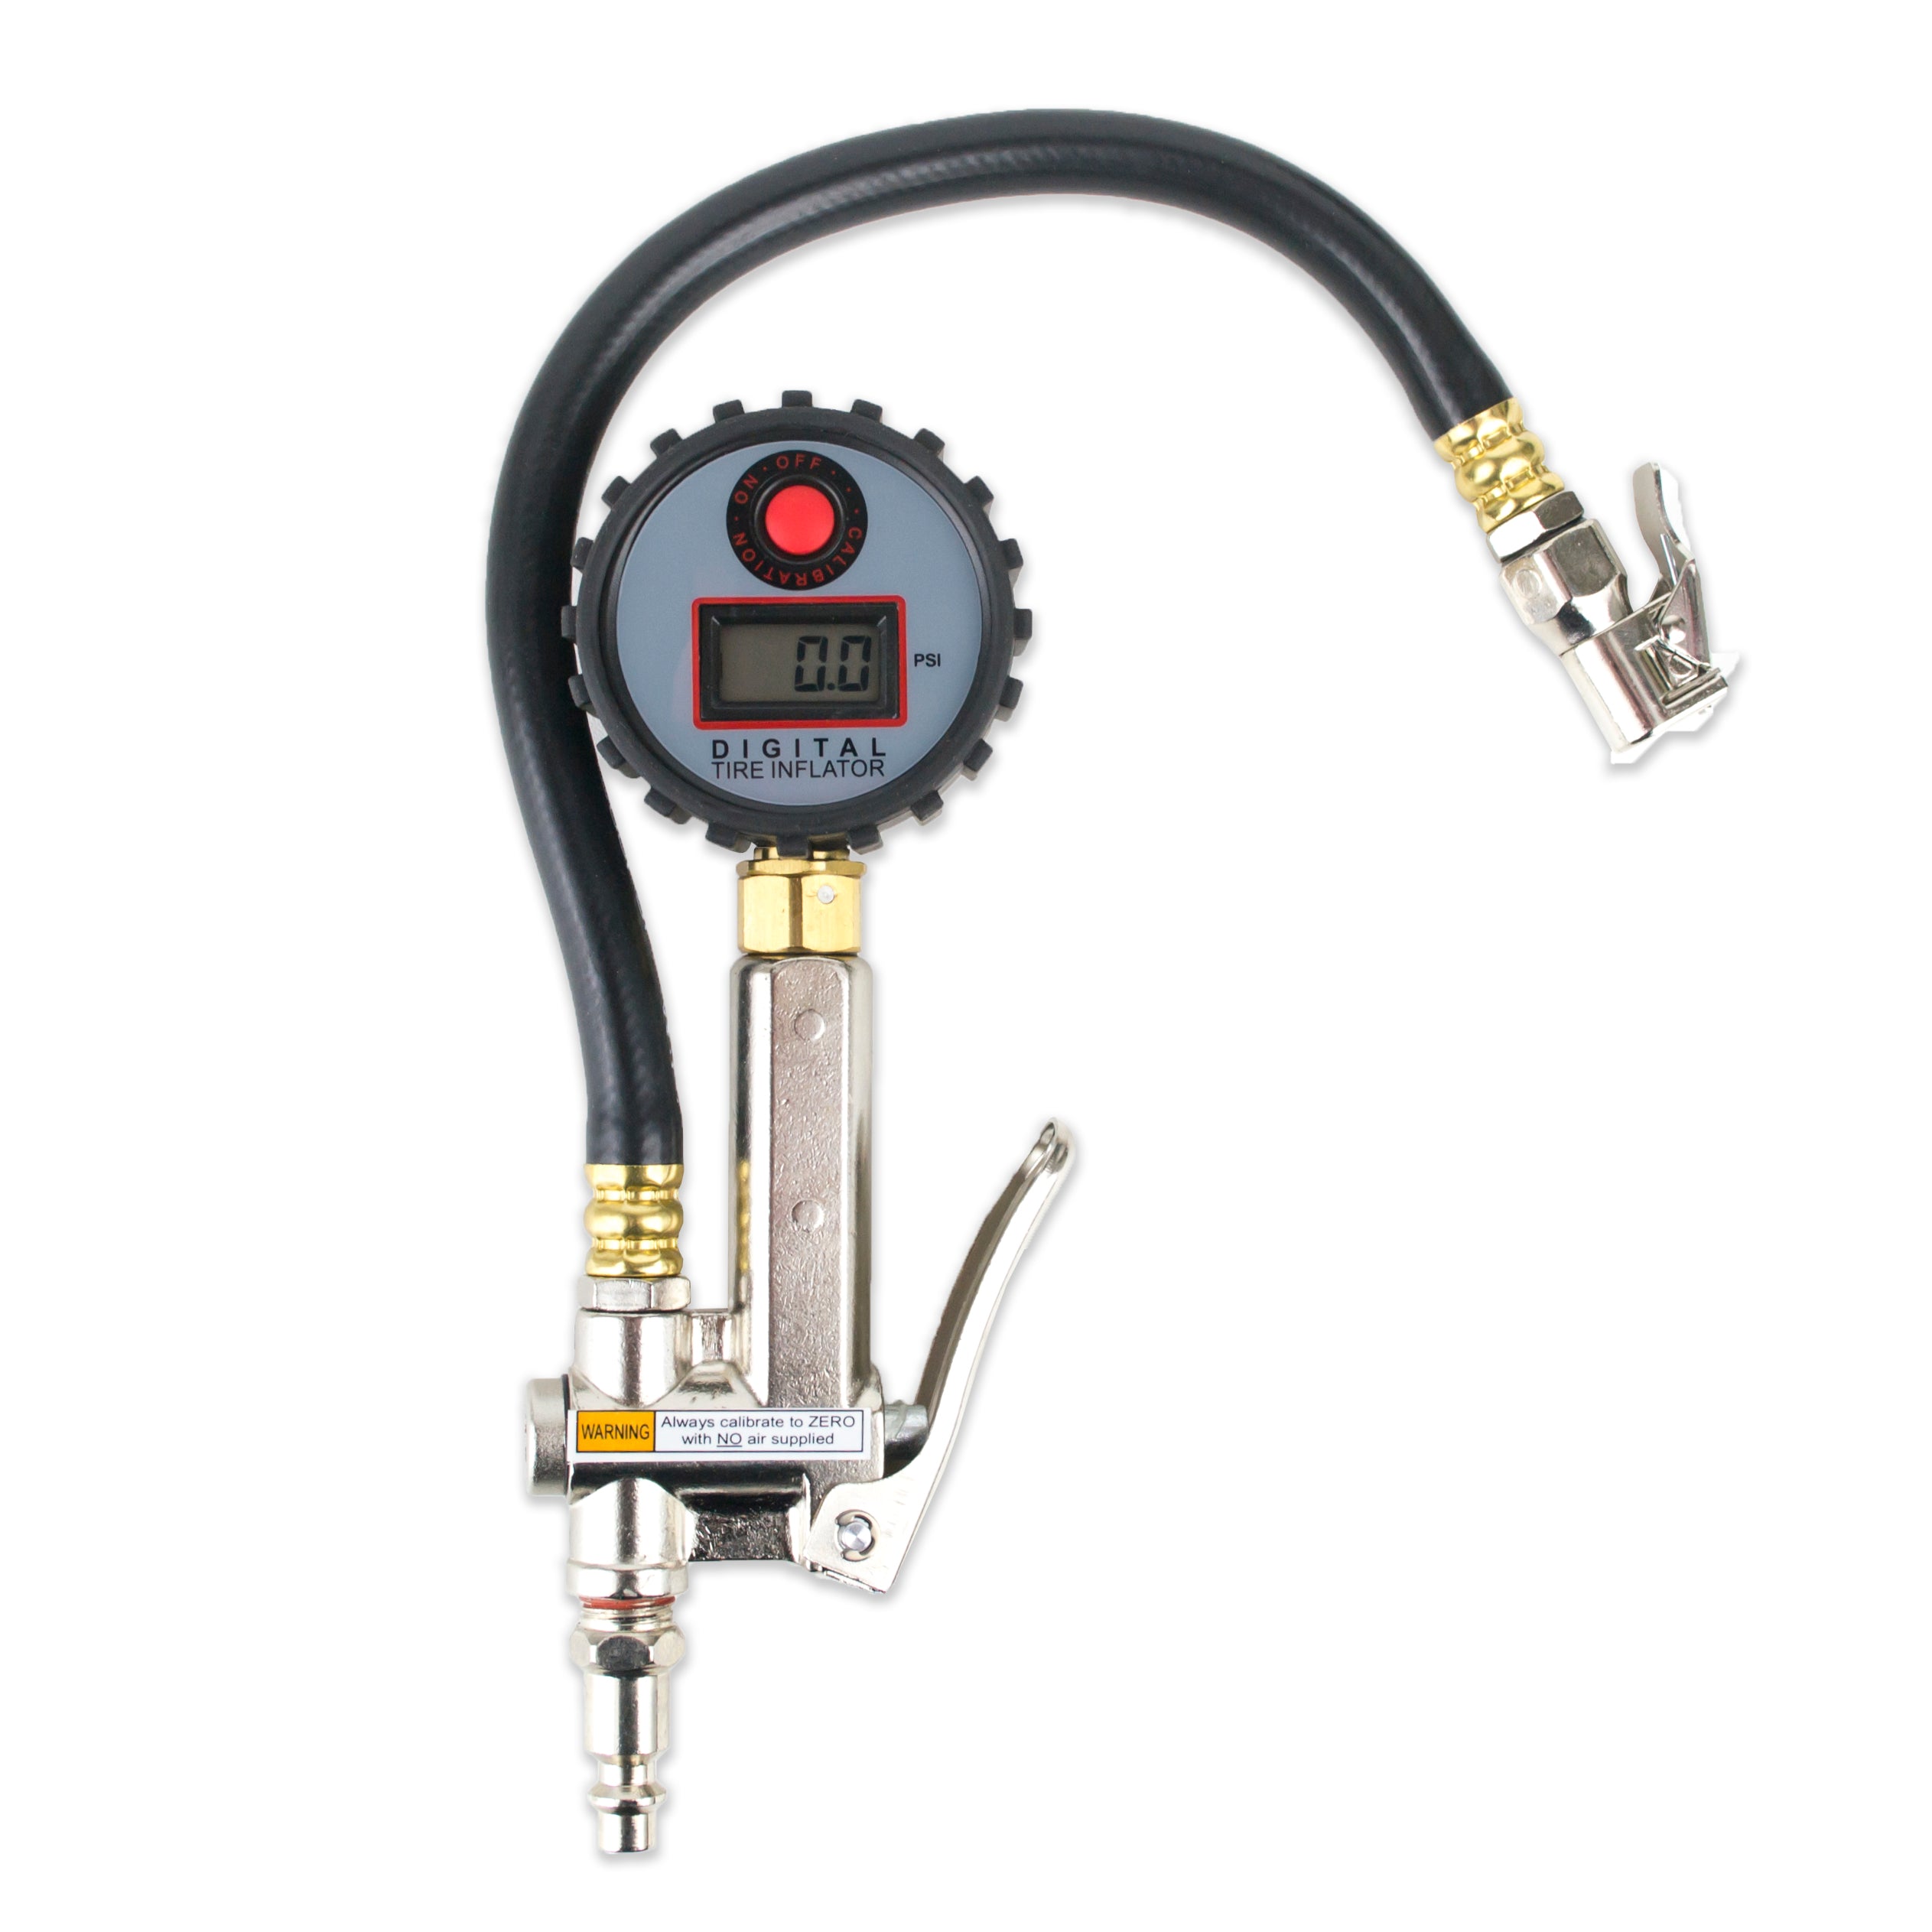 Digital Tire Inflator with Accurate LCD Gauge and Straight Clip-On Chuck - Tool Guy Republic